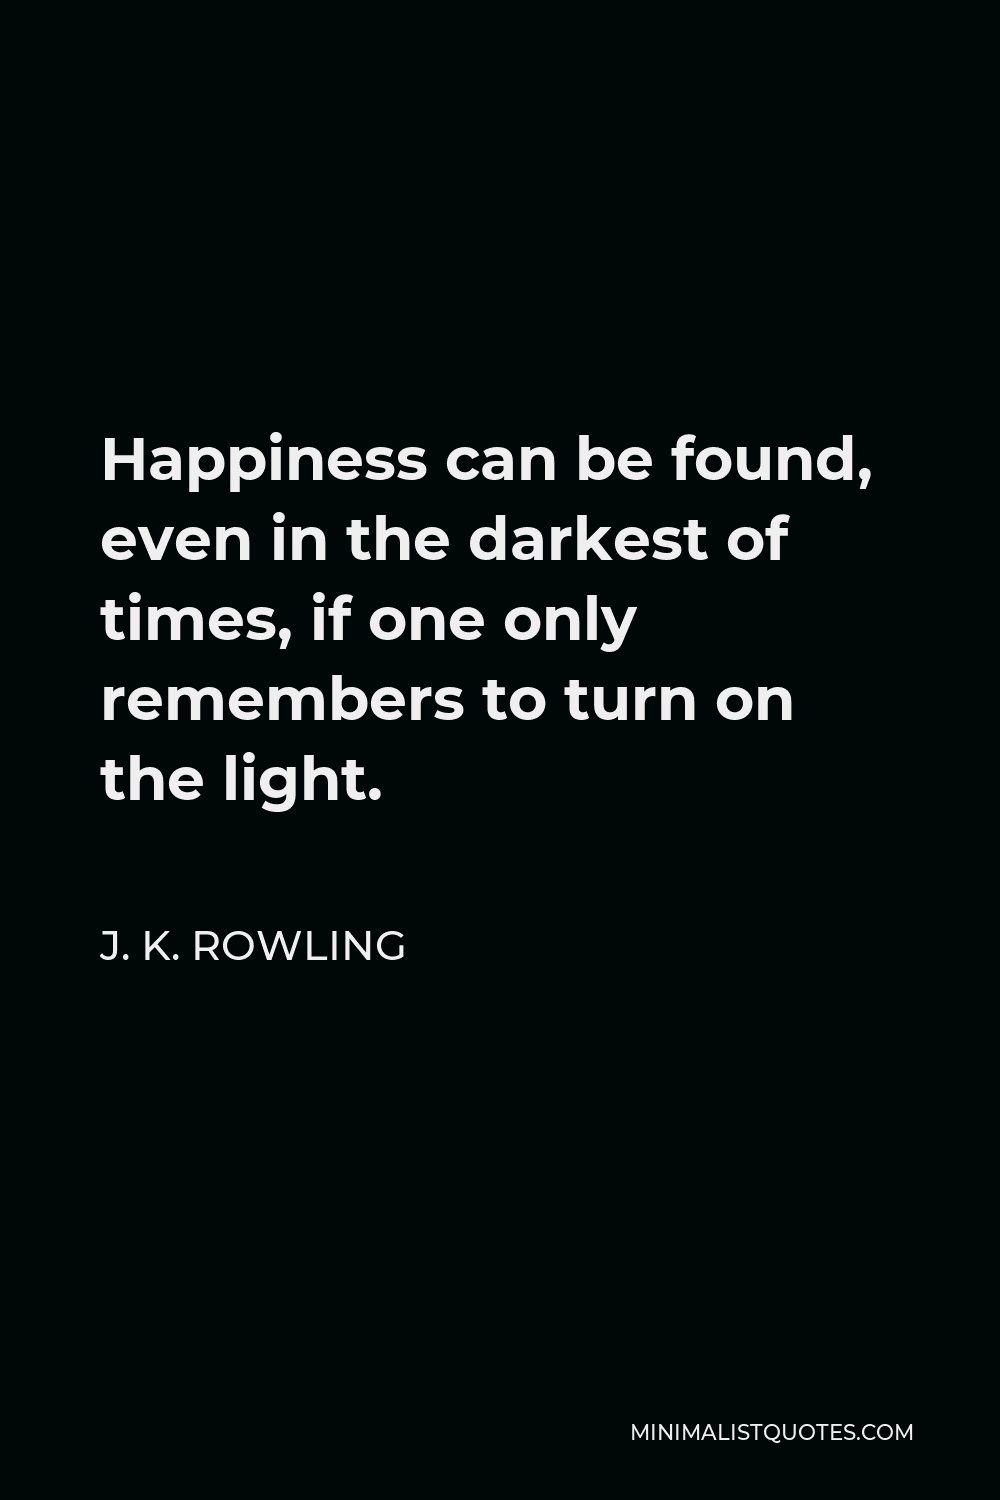 J. K. Rowling Quote - Happiness can be found, even in the darkest of times, if one only remembers to turn on the light.